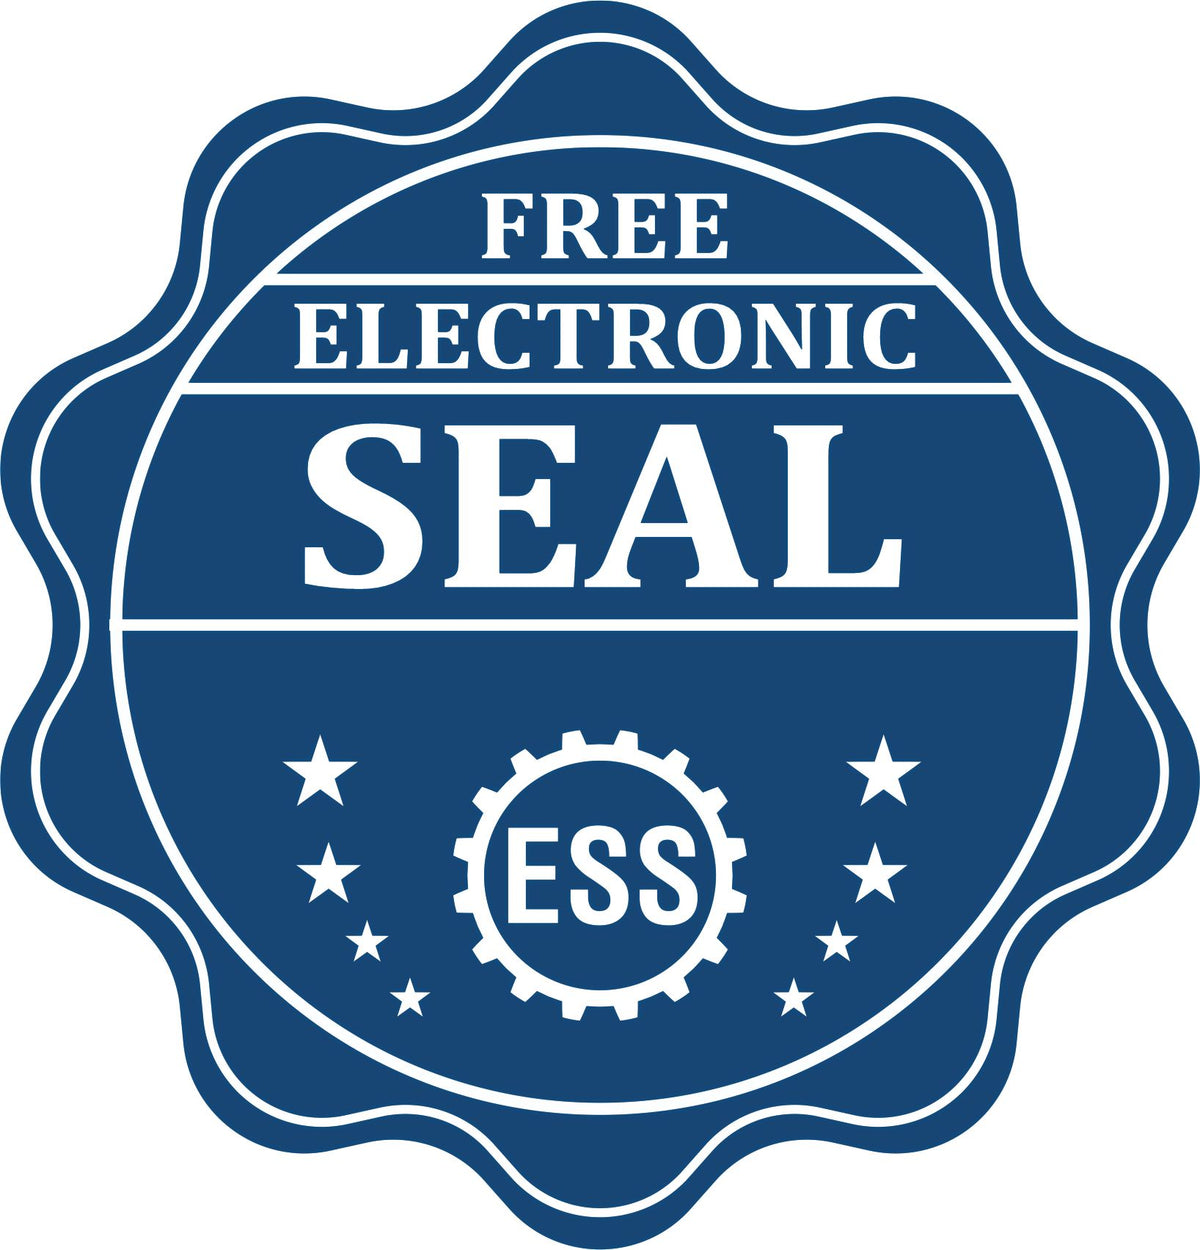 A badge showing a free electronic seal for the South Dakota Desk Architect Embossing Seal with stars and the ESS gear on the emblem.